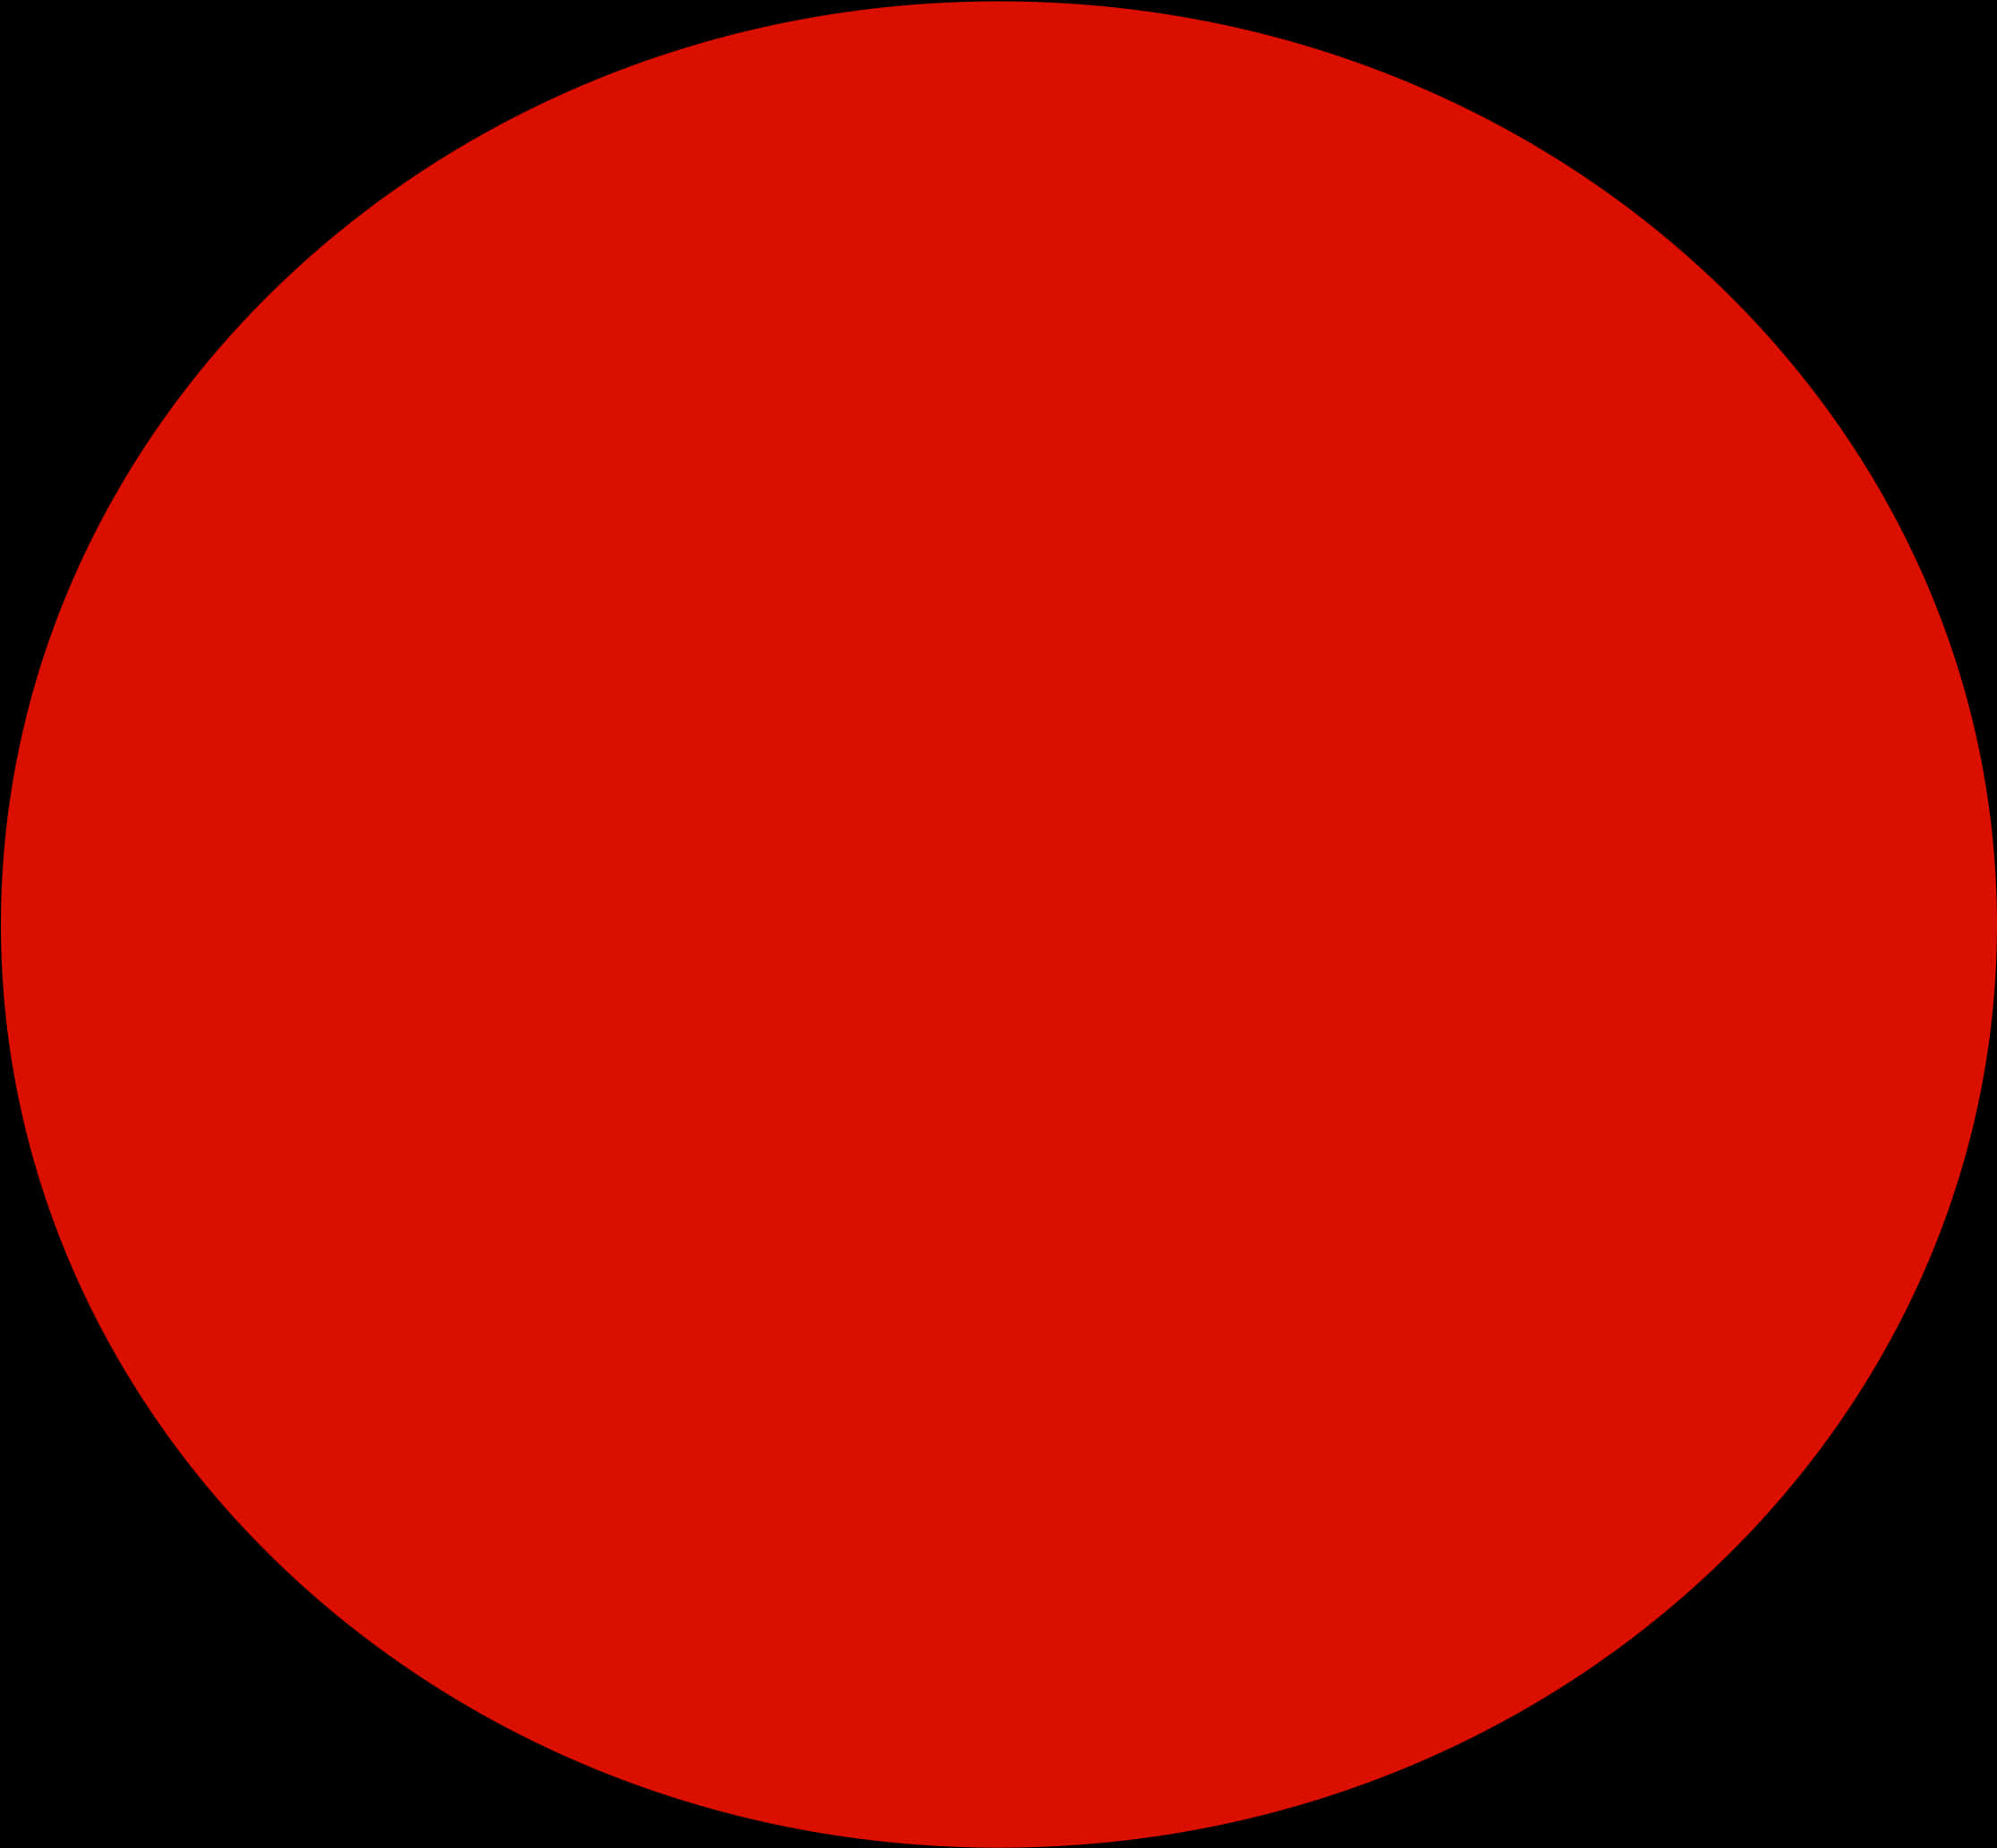 A Red Circle With Black Background